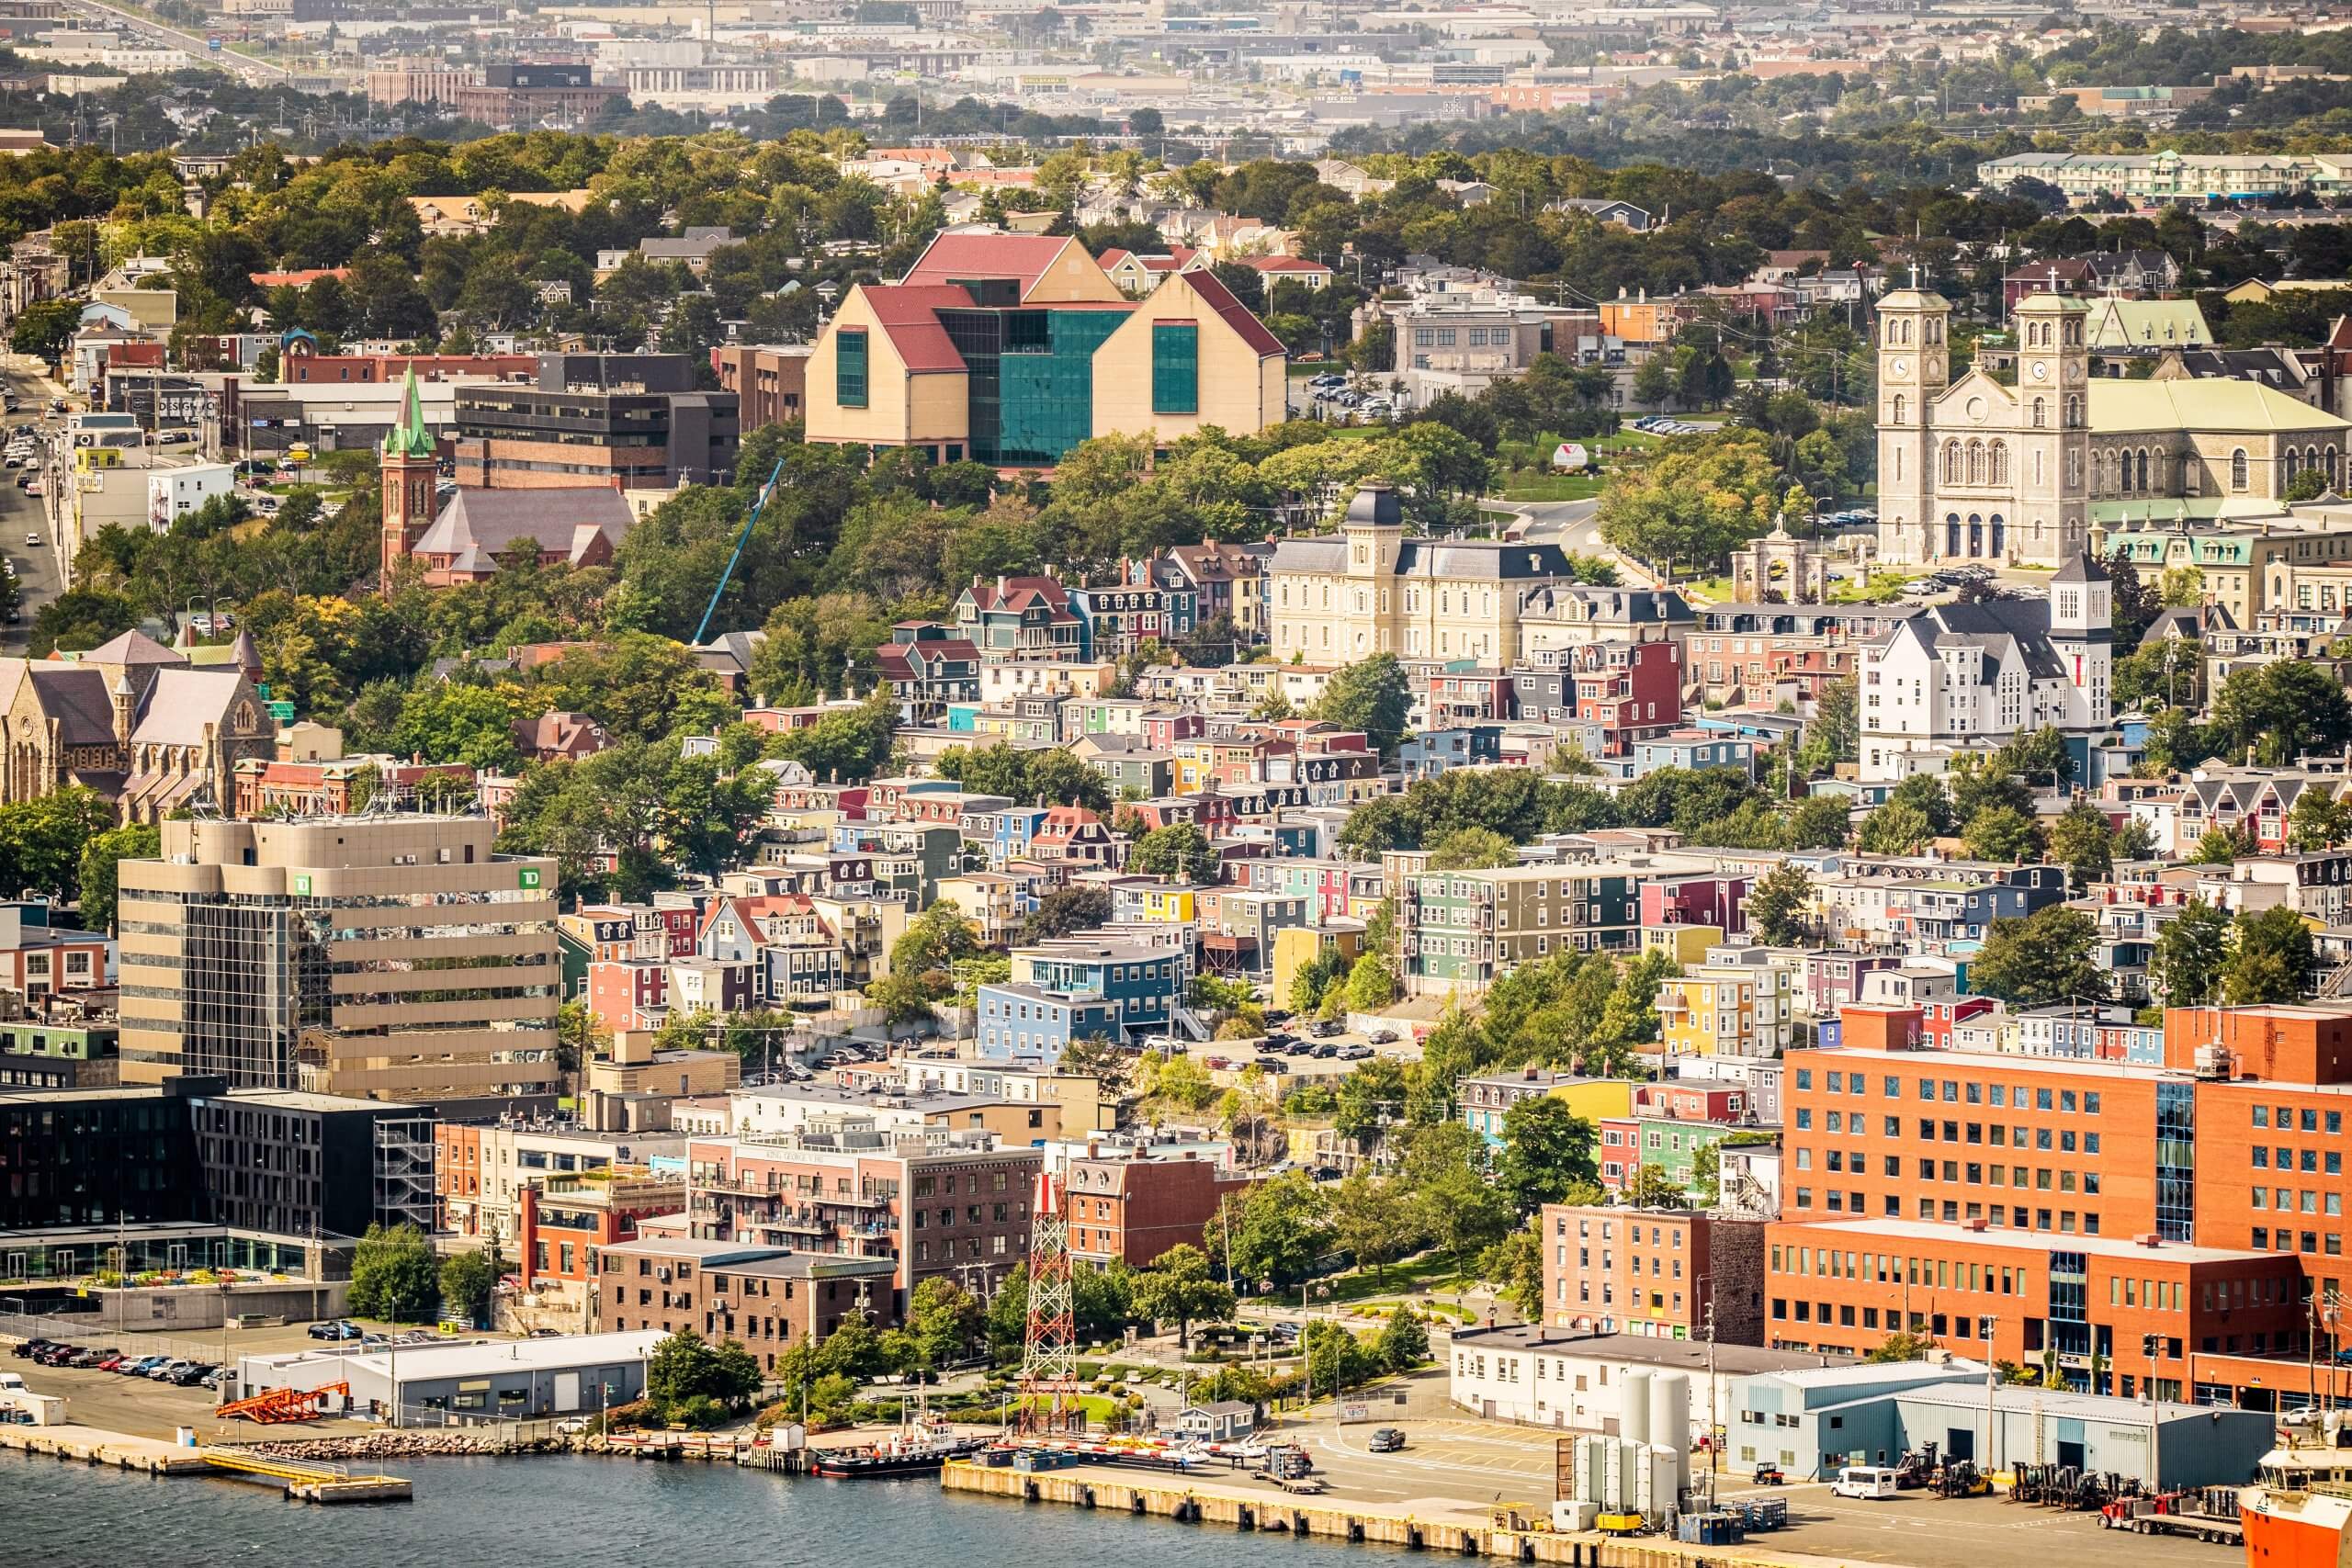 Downtown St. John’s as seen from Signal Hill